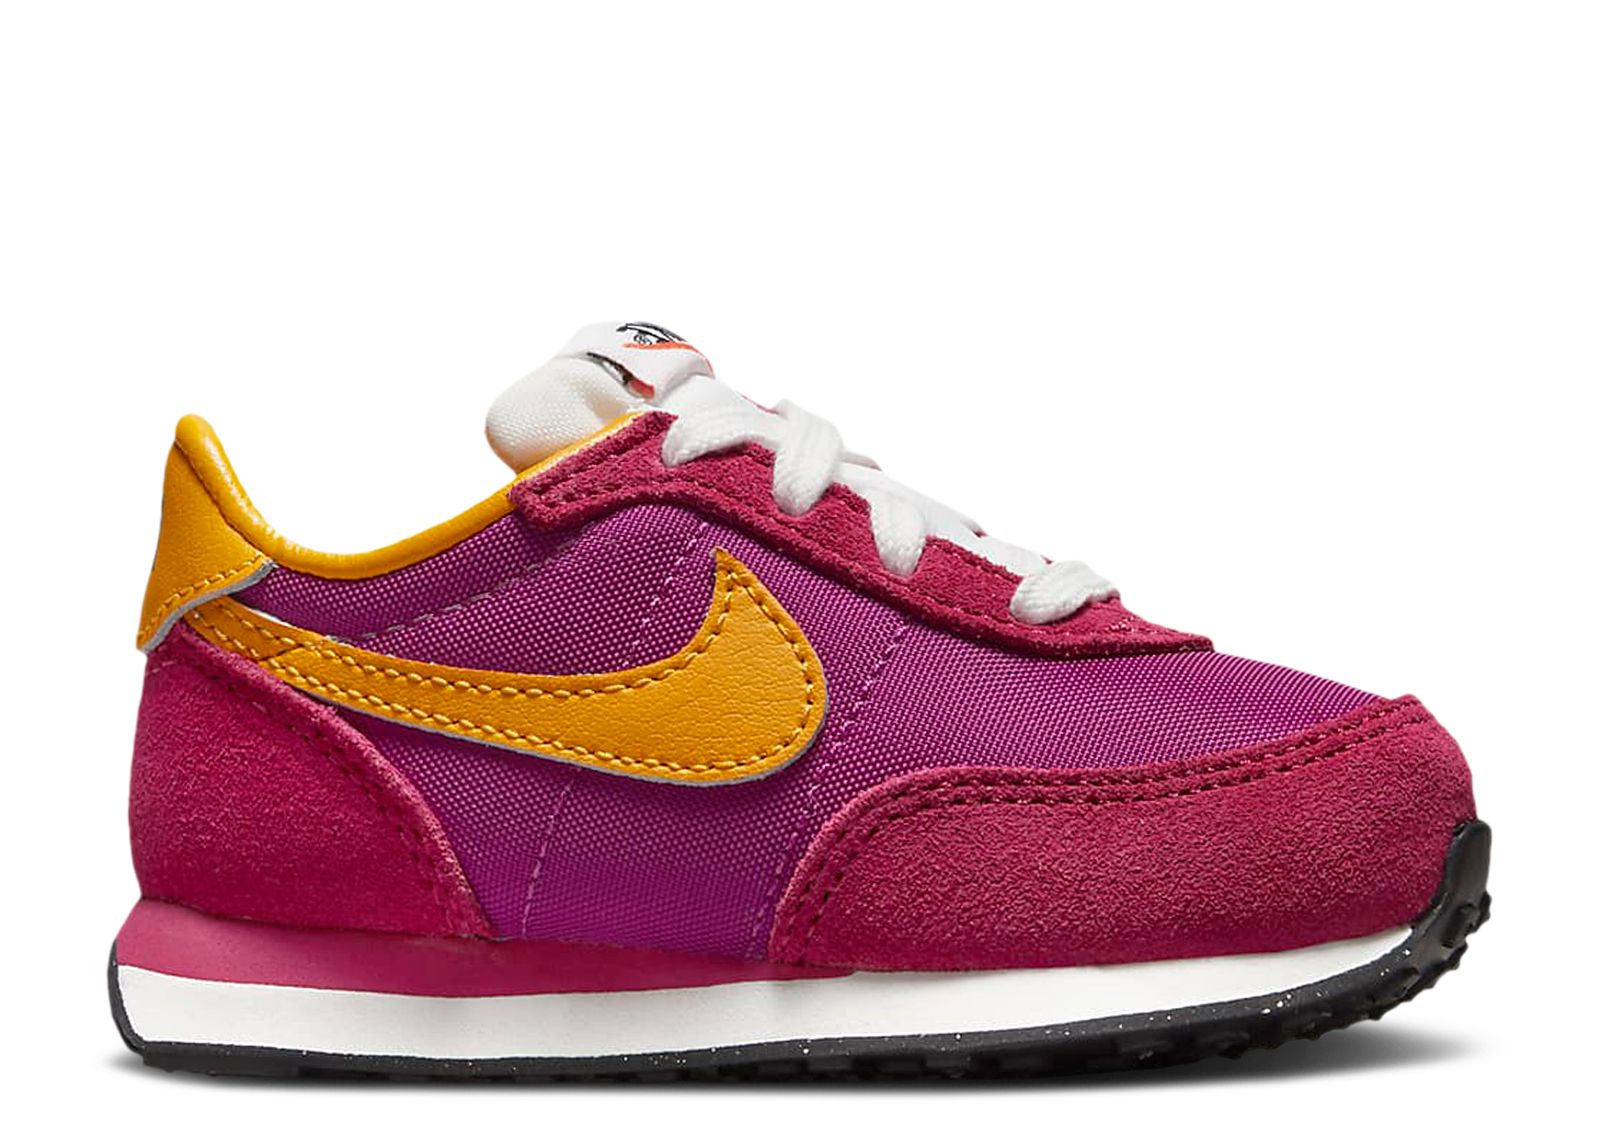 Waffle Trainer 2 SP TD 'Fireberry'